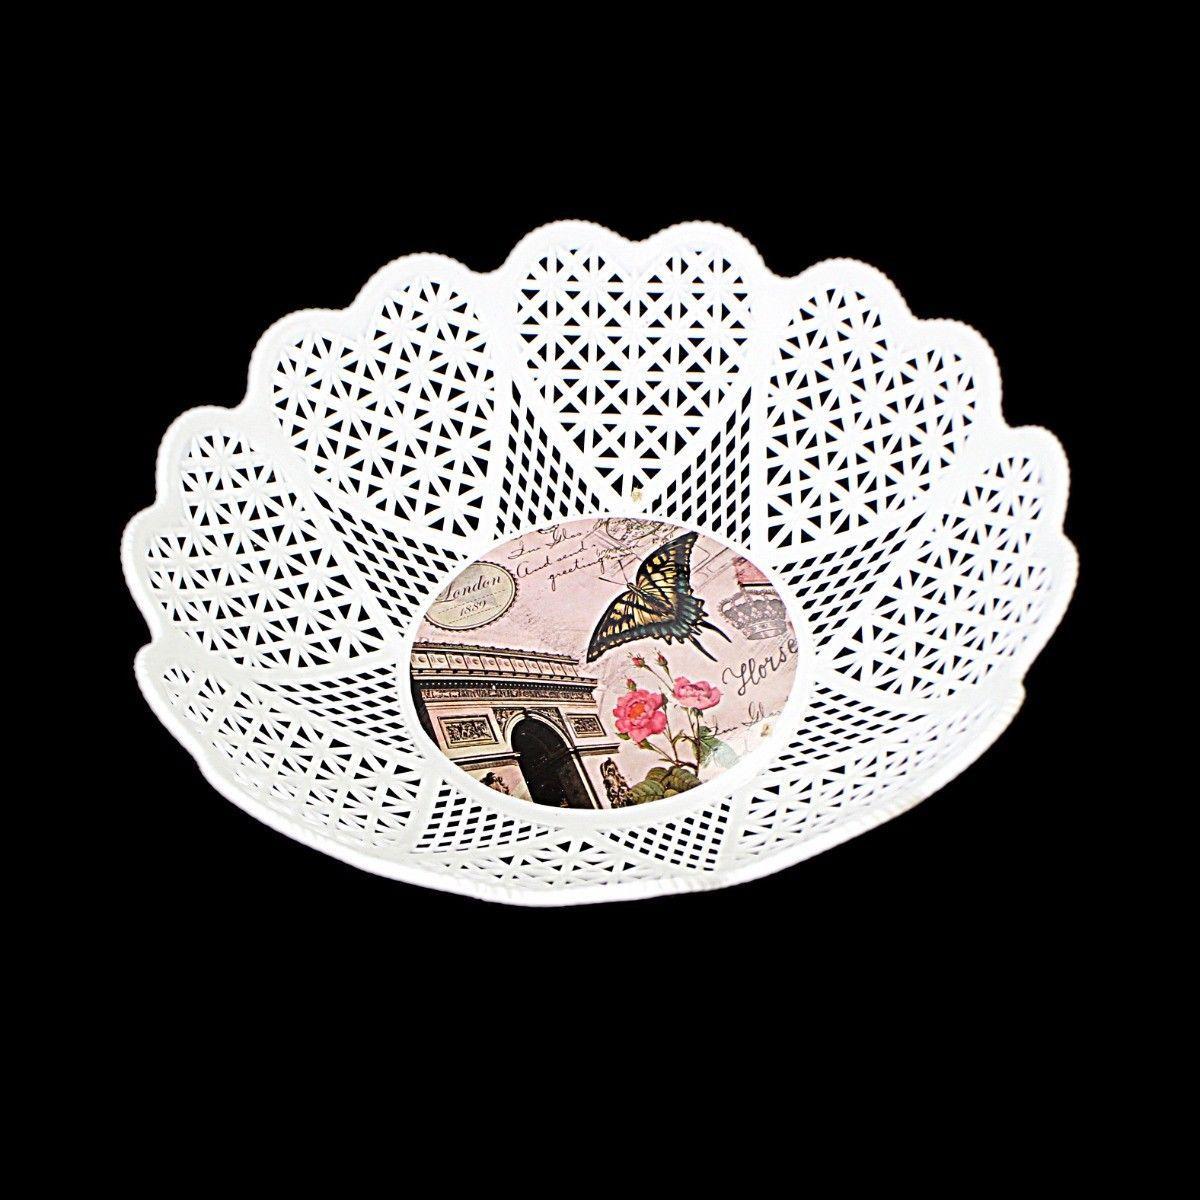 Round Plastic Heart Shaped Fruit Serving Bowl Tray Printed Design 22 cm Assorted Designs 3679 (Parcel Rate)